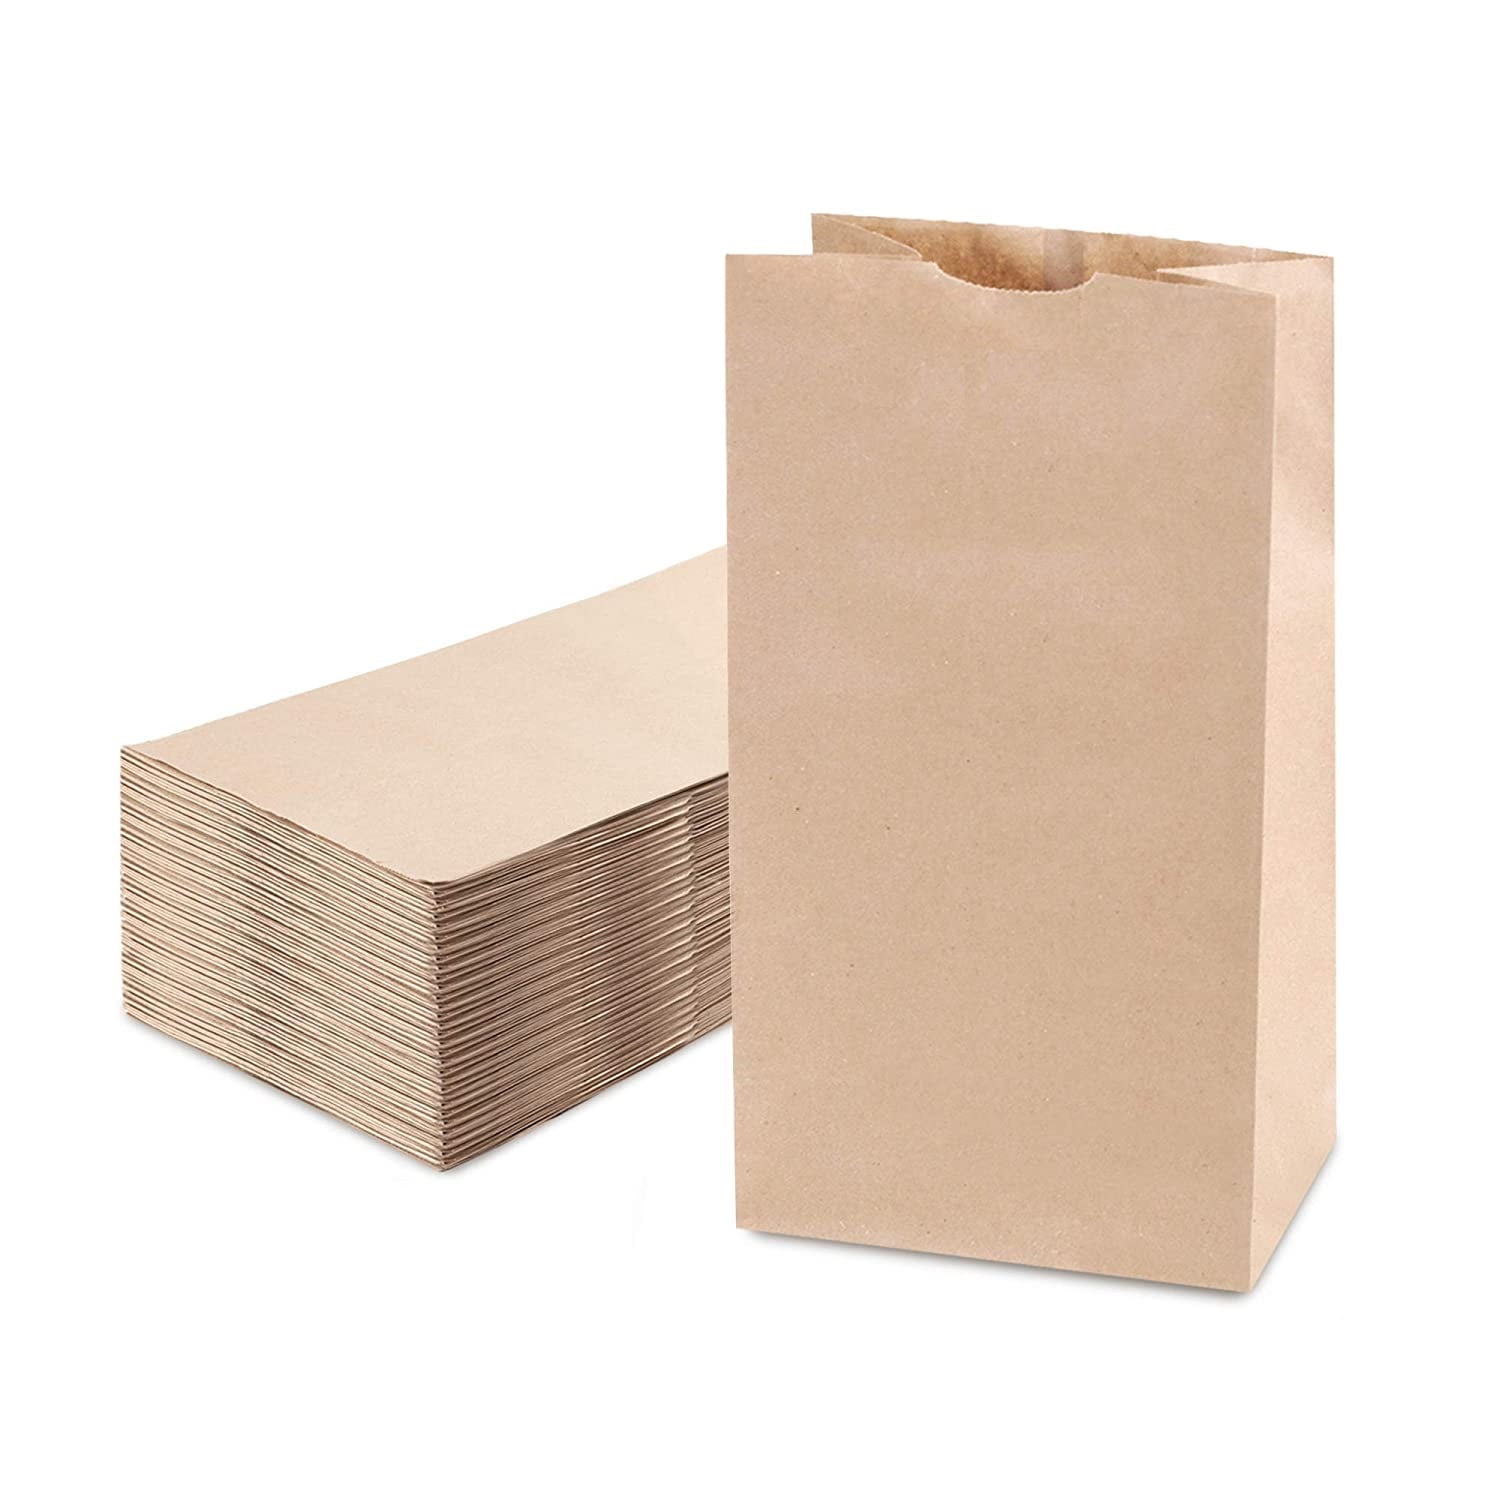 Bag Tek 5 x 3 x 8.75 Paper Bags for Snacks, 100 Disposable French Fry Bags - Greaseproof, for Popcorn, Cookies, Fries, and More, White Paper Kraft